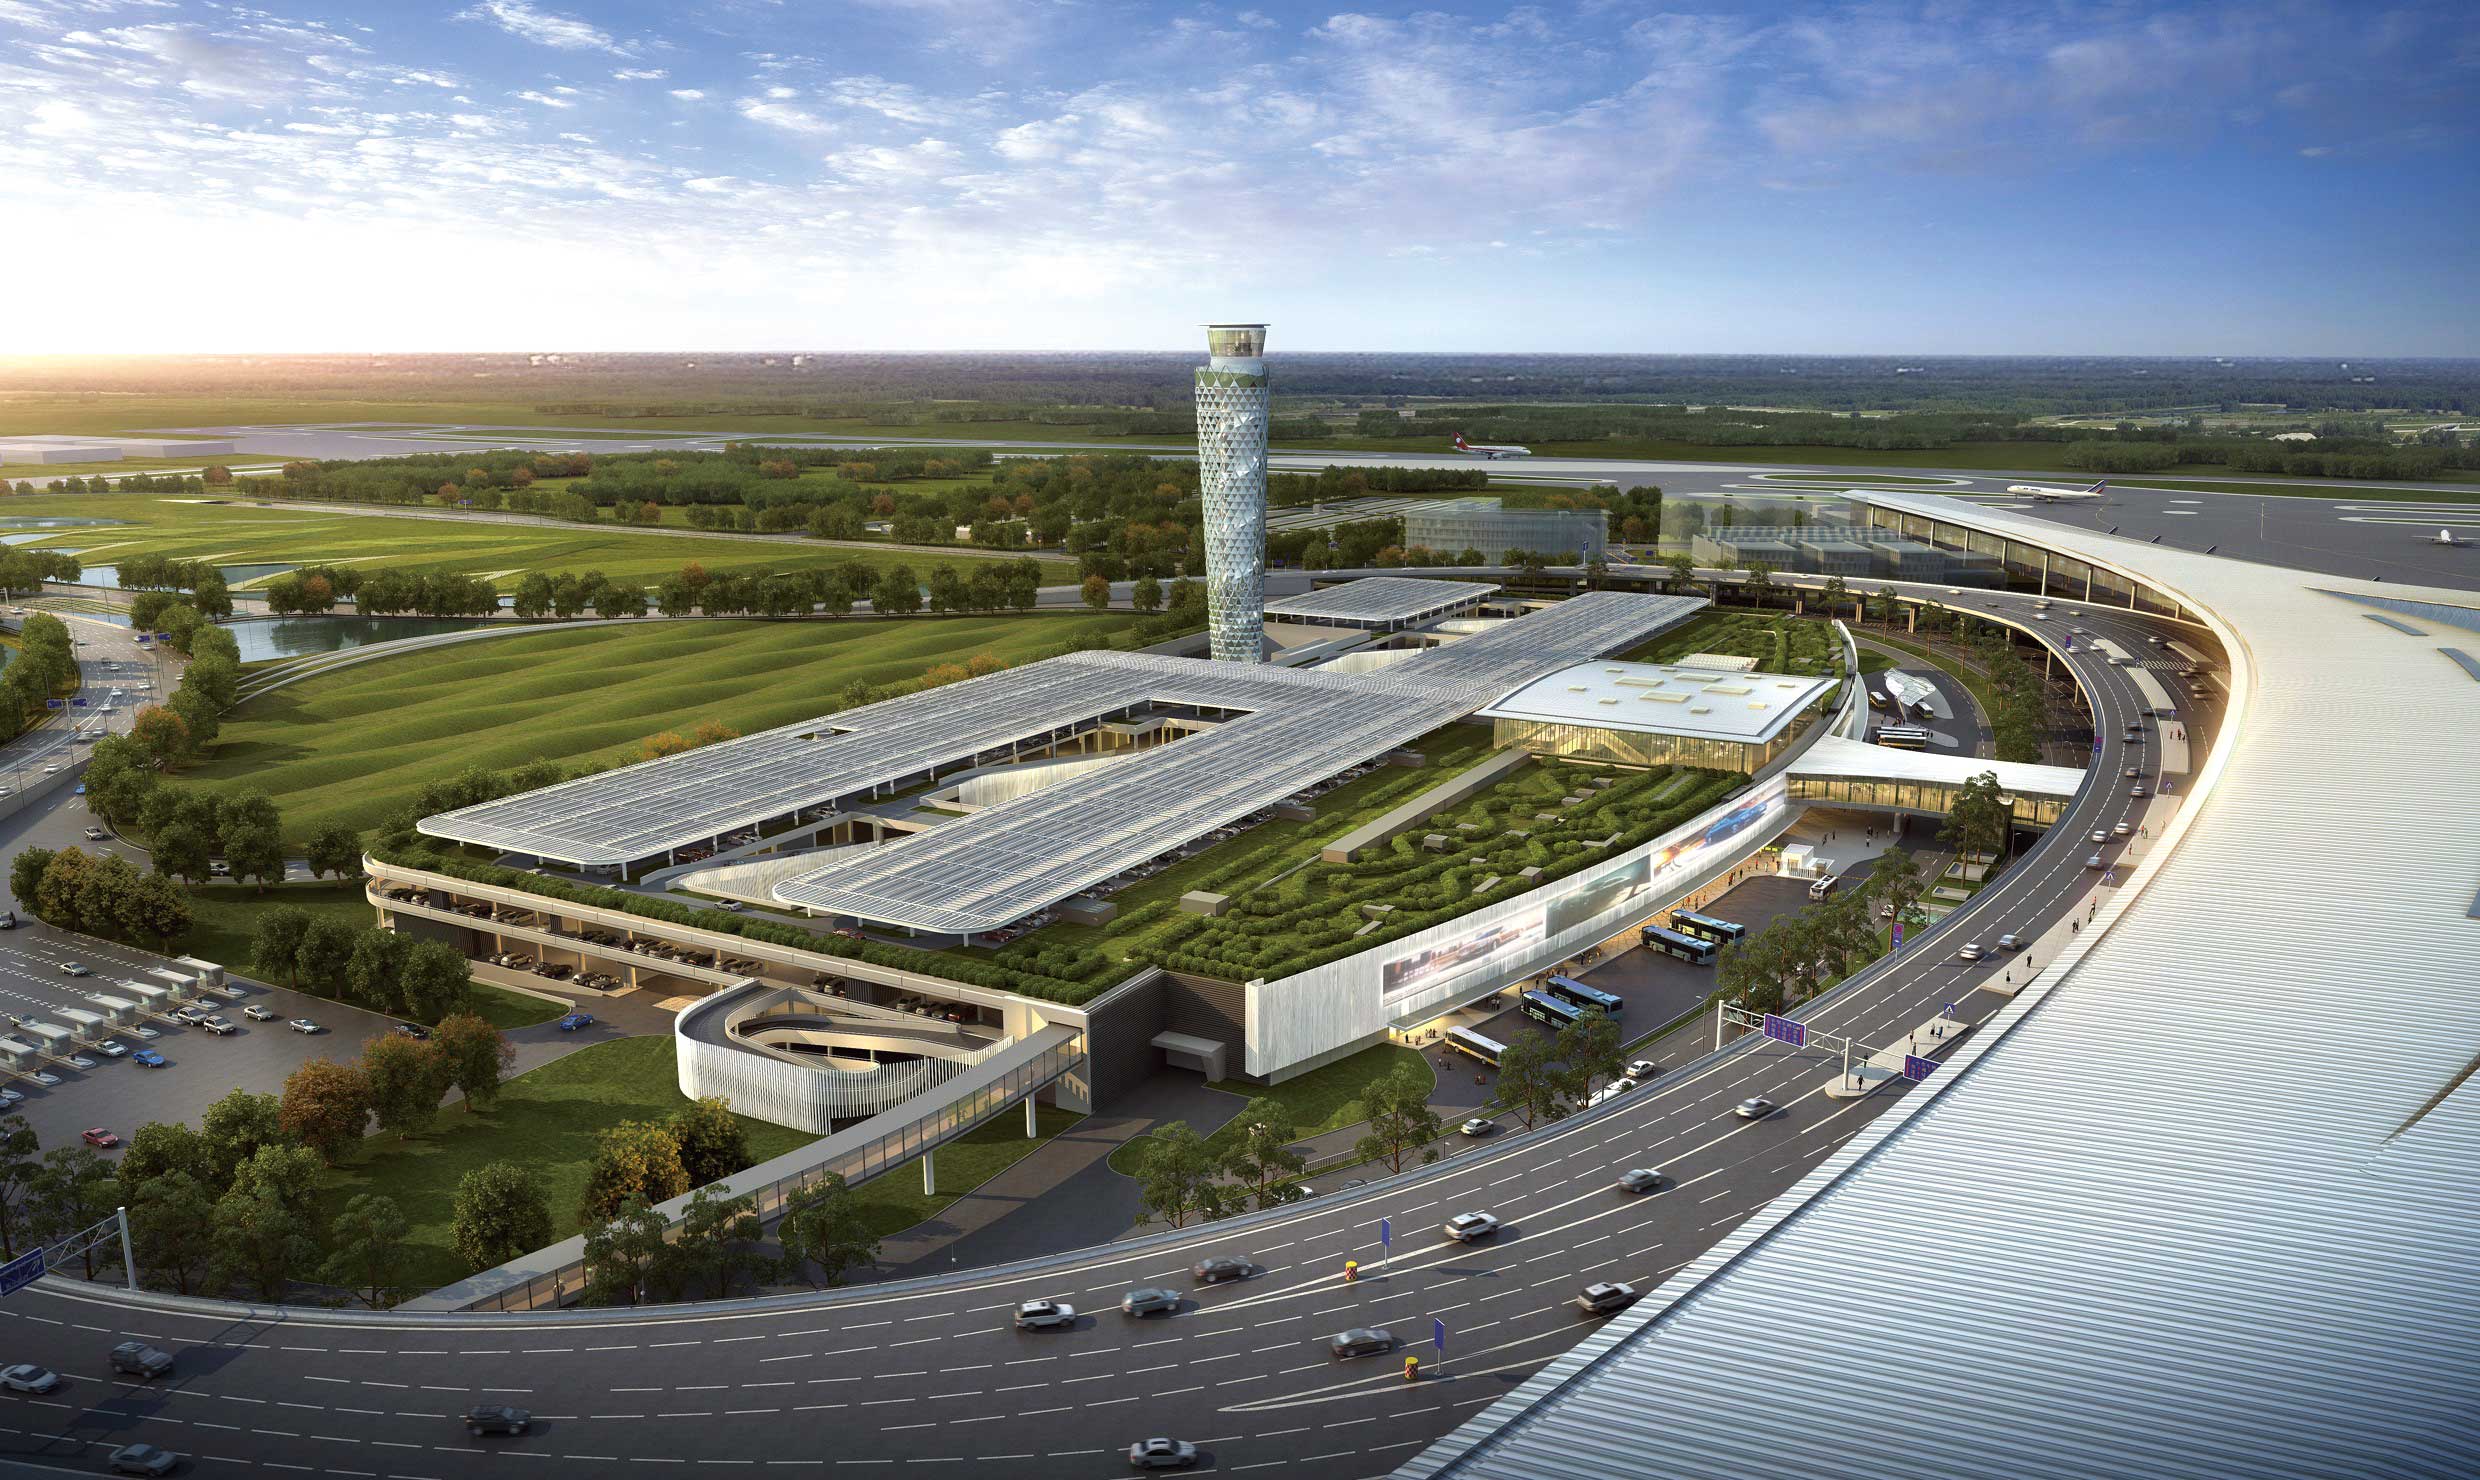 Qingdao Jiaozhou International Airport (Integrated Transportation Center and Integrated Tower)